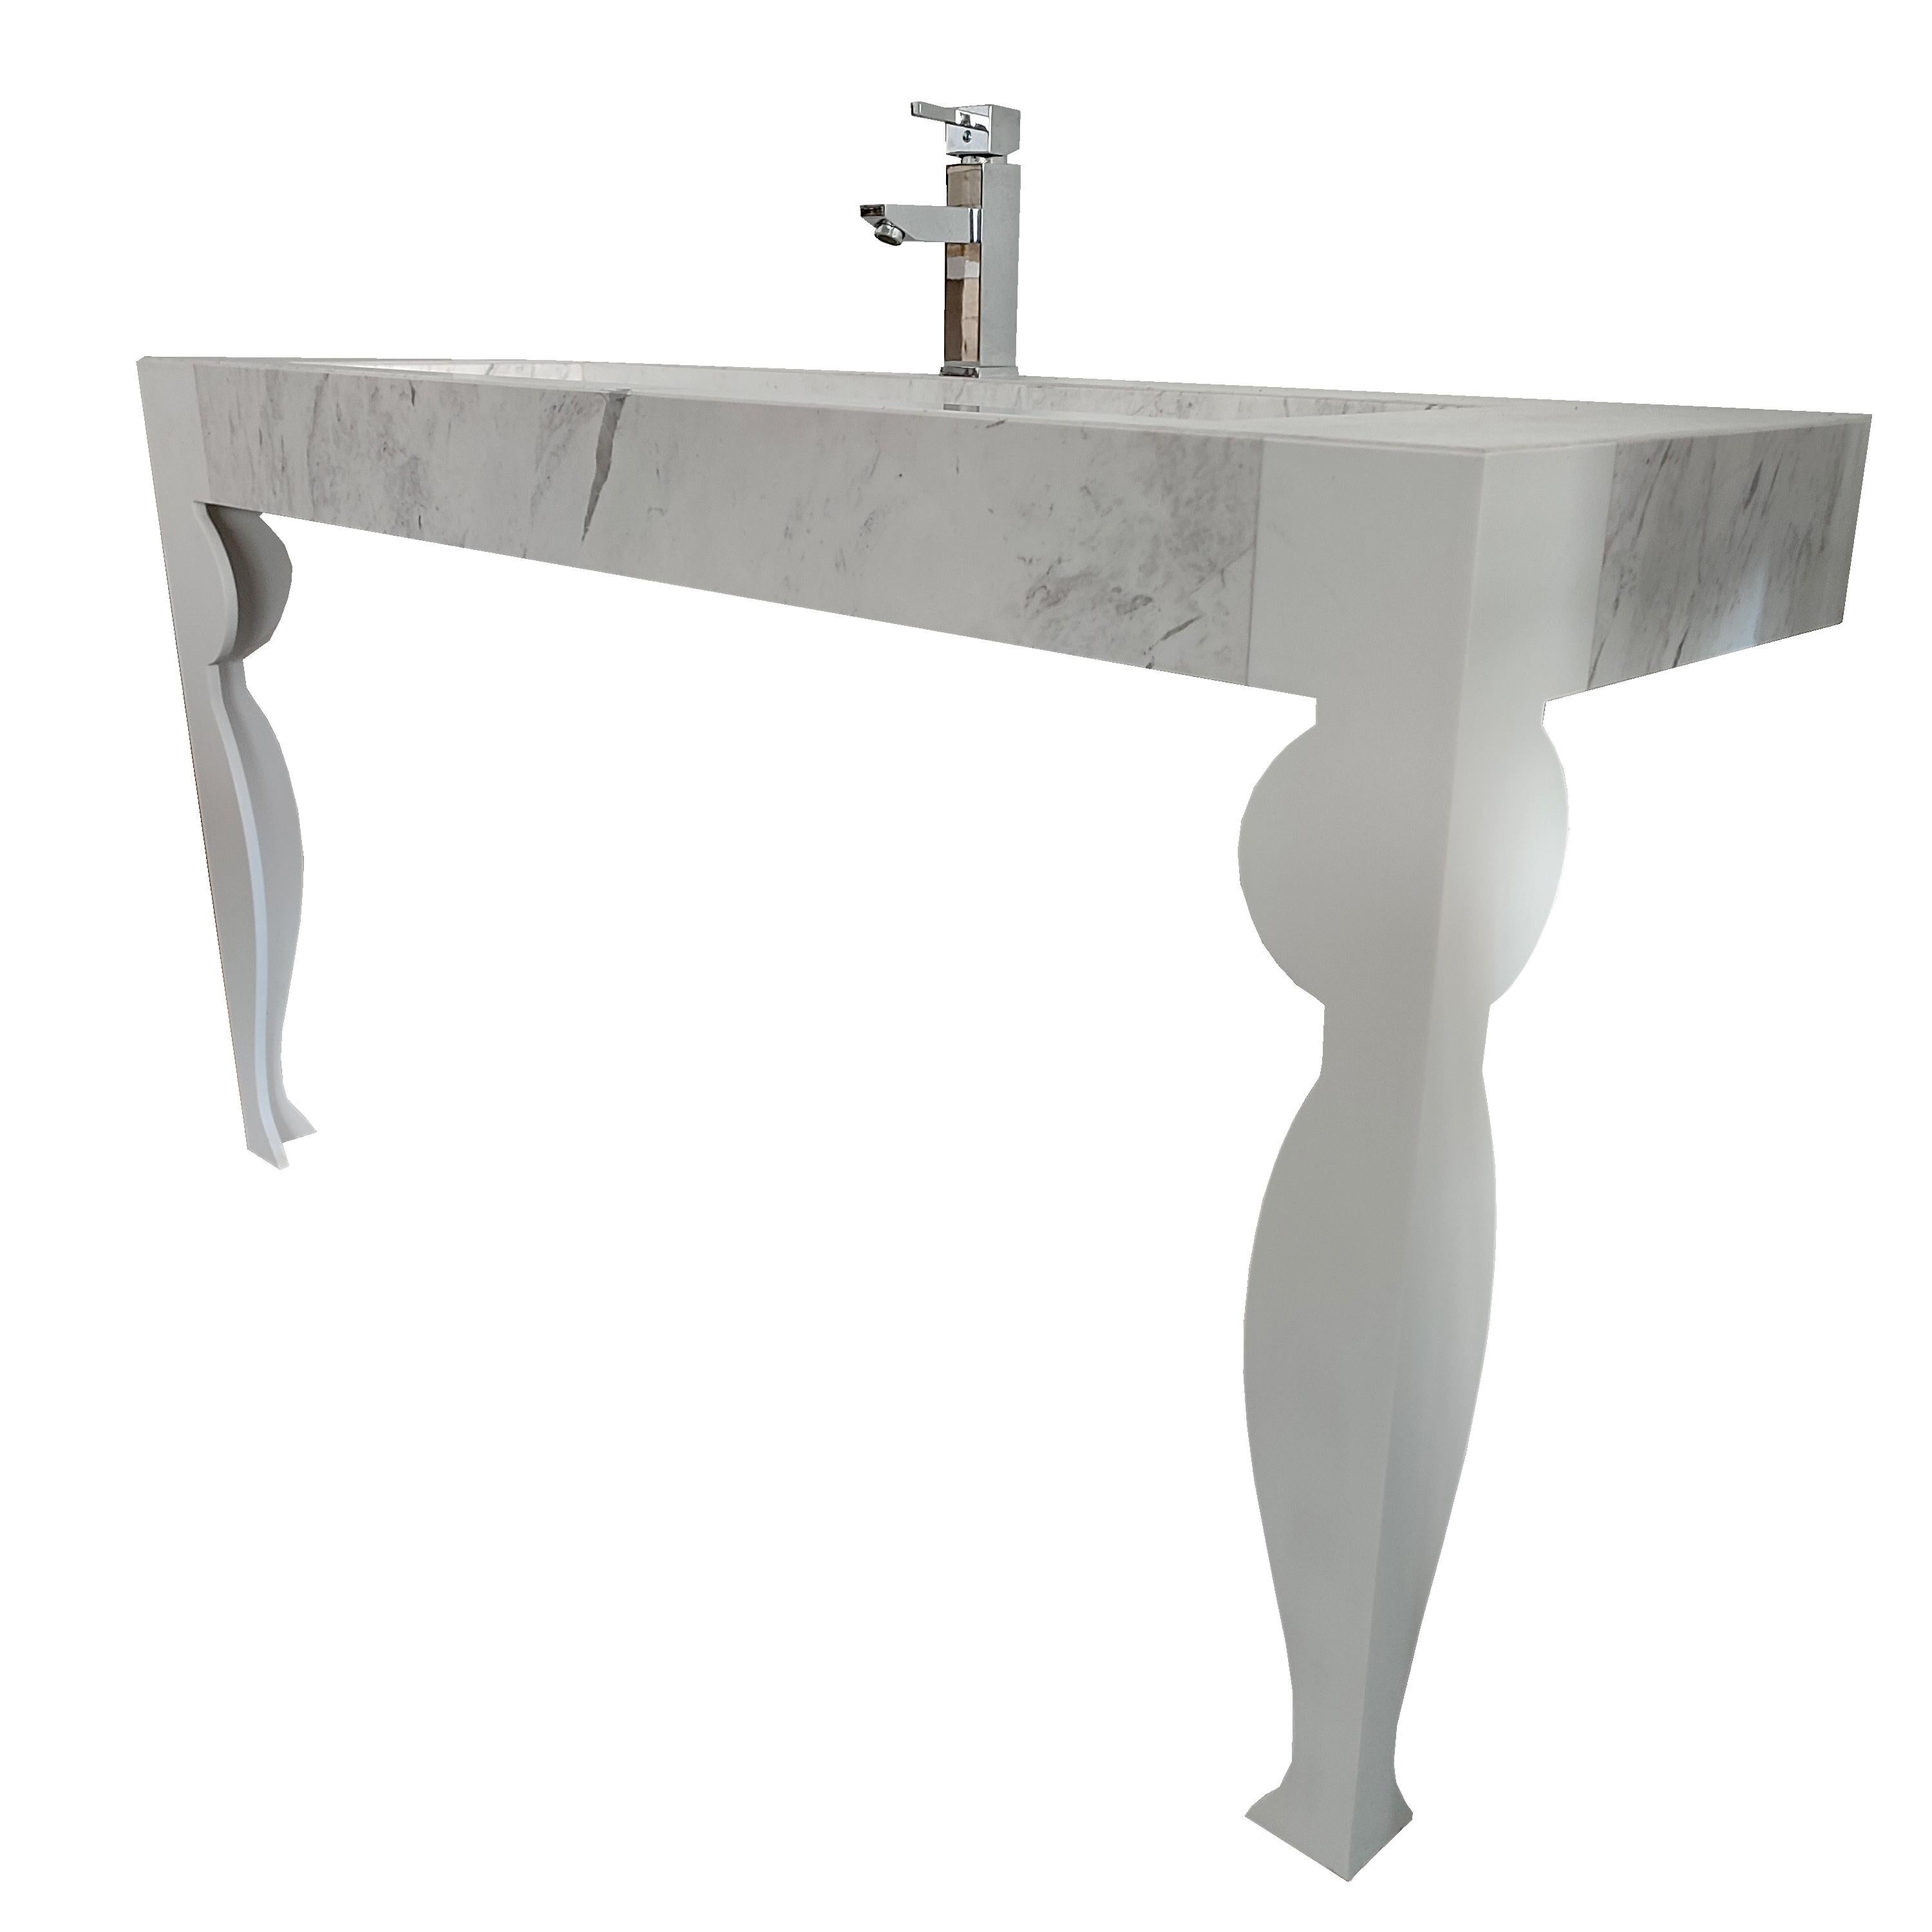 VOL Washbasin White Carrara Italian Marble & Krion Modern Design In Stock
VOL is a contemporary style bathroom vanity unit made of Italian white Carrara marble. The VOL washbasin has two front legs with scrolls on its front legs. At the back, the